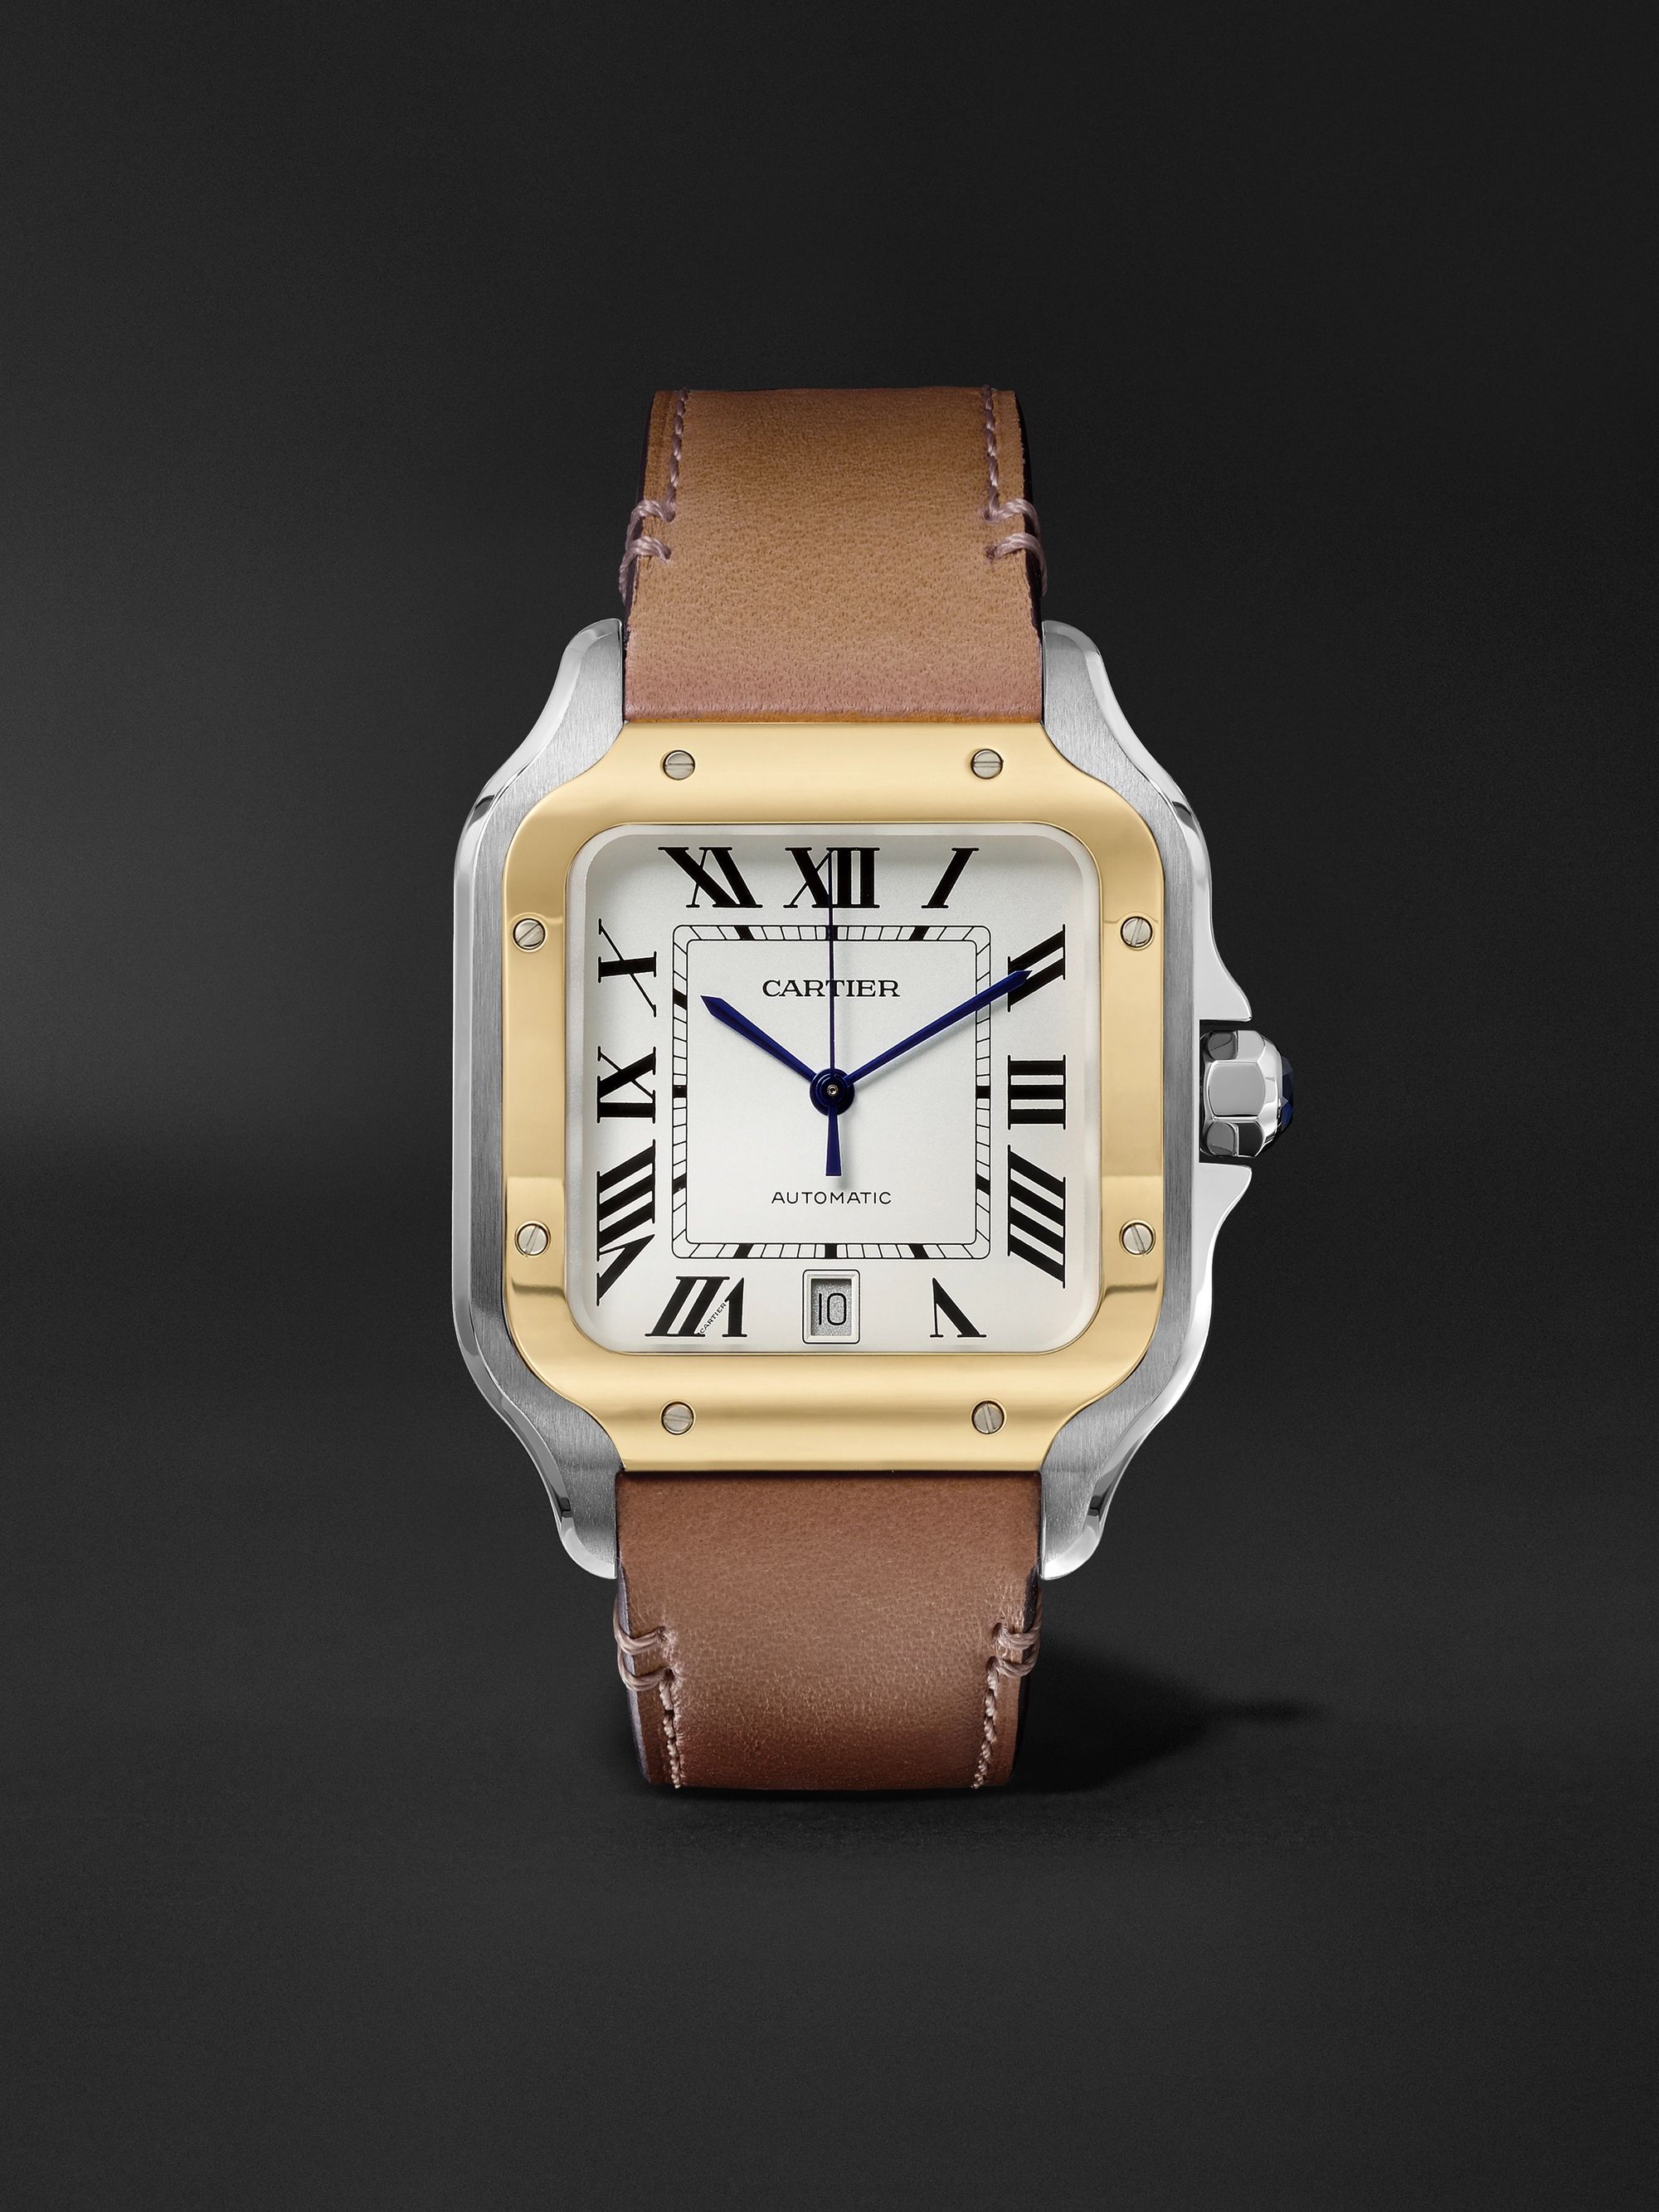 CARTIER Santos Automatic 39.8mm 18-Karat Gold Interchangeable Stainless Steel and Leather Watch, Ref. No. W2SA0006